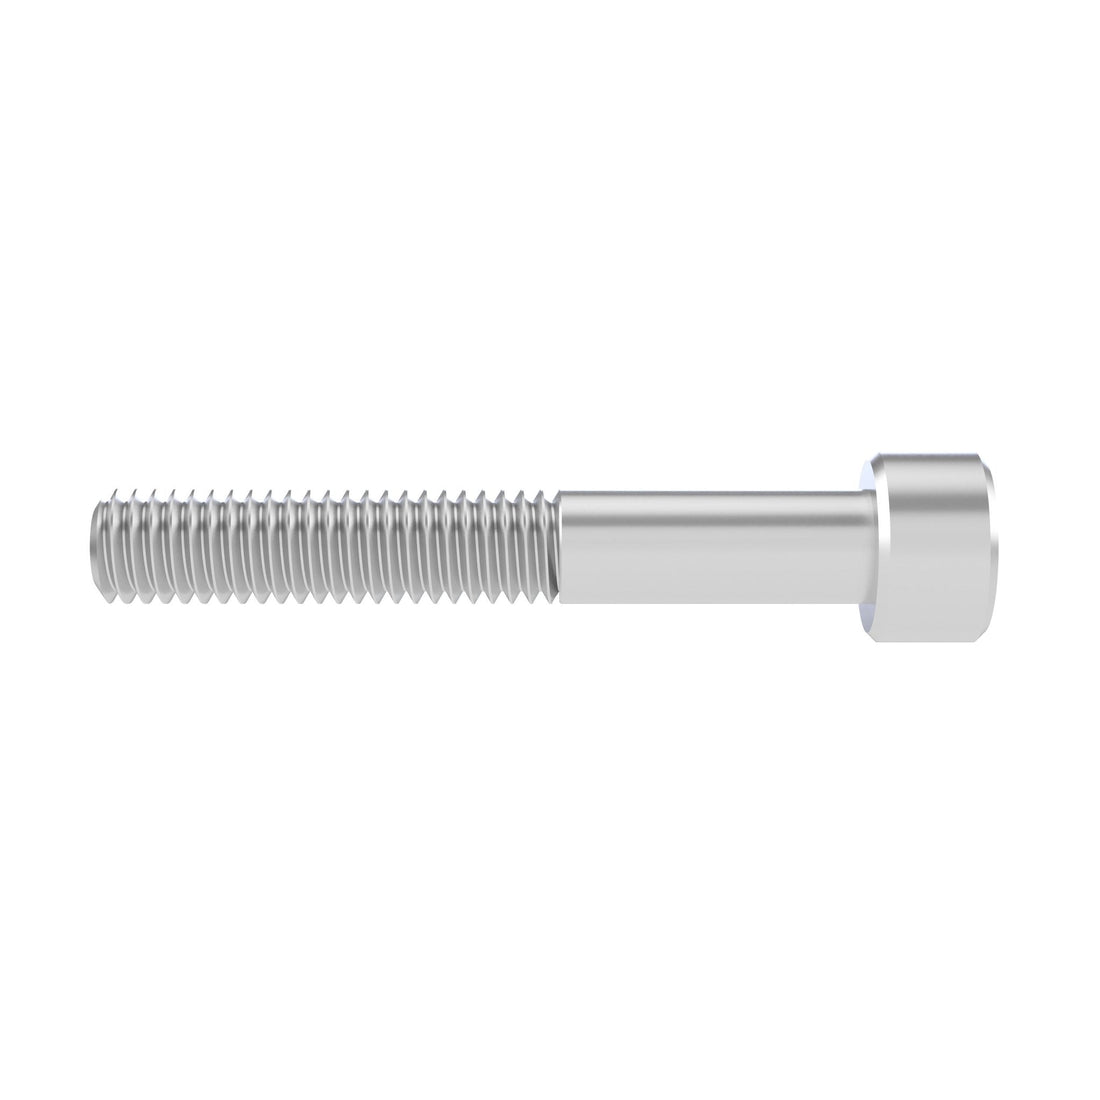 M6-1.0 X 40mm Penta Pin Security Bolts - Bicycle Bolts